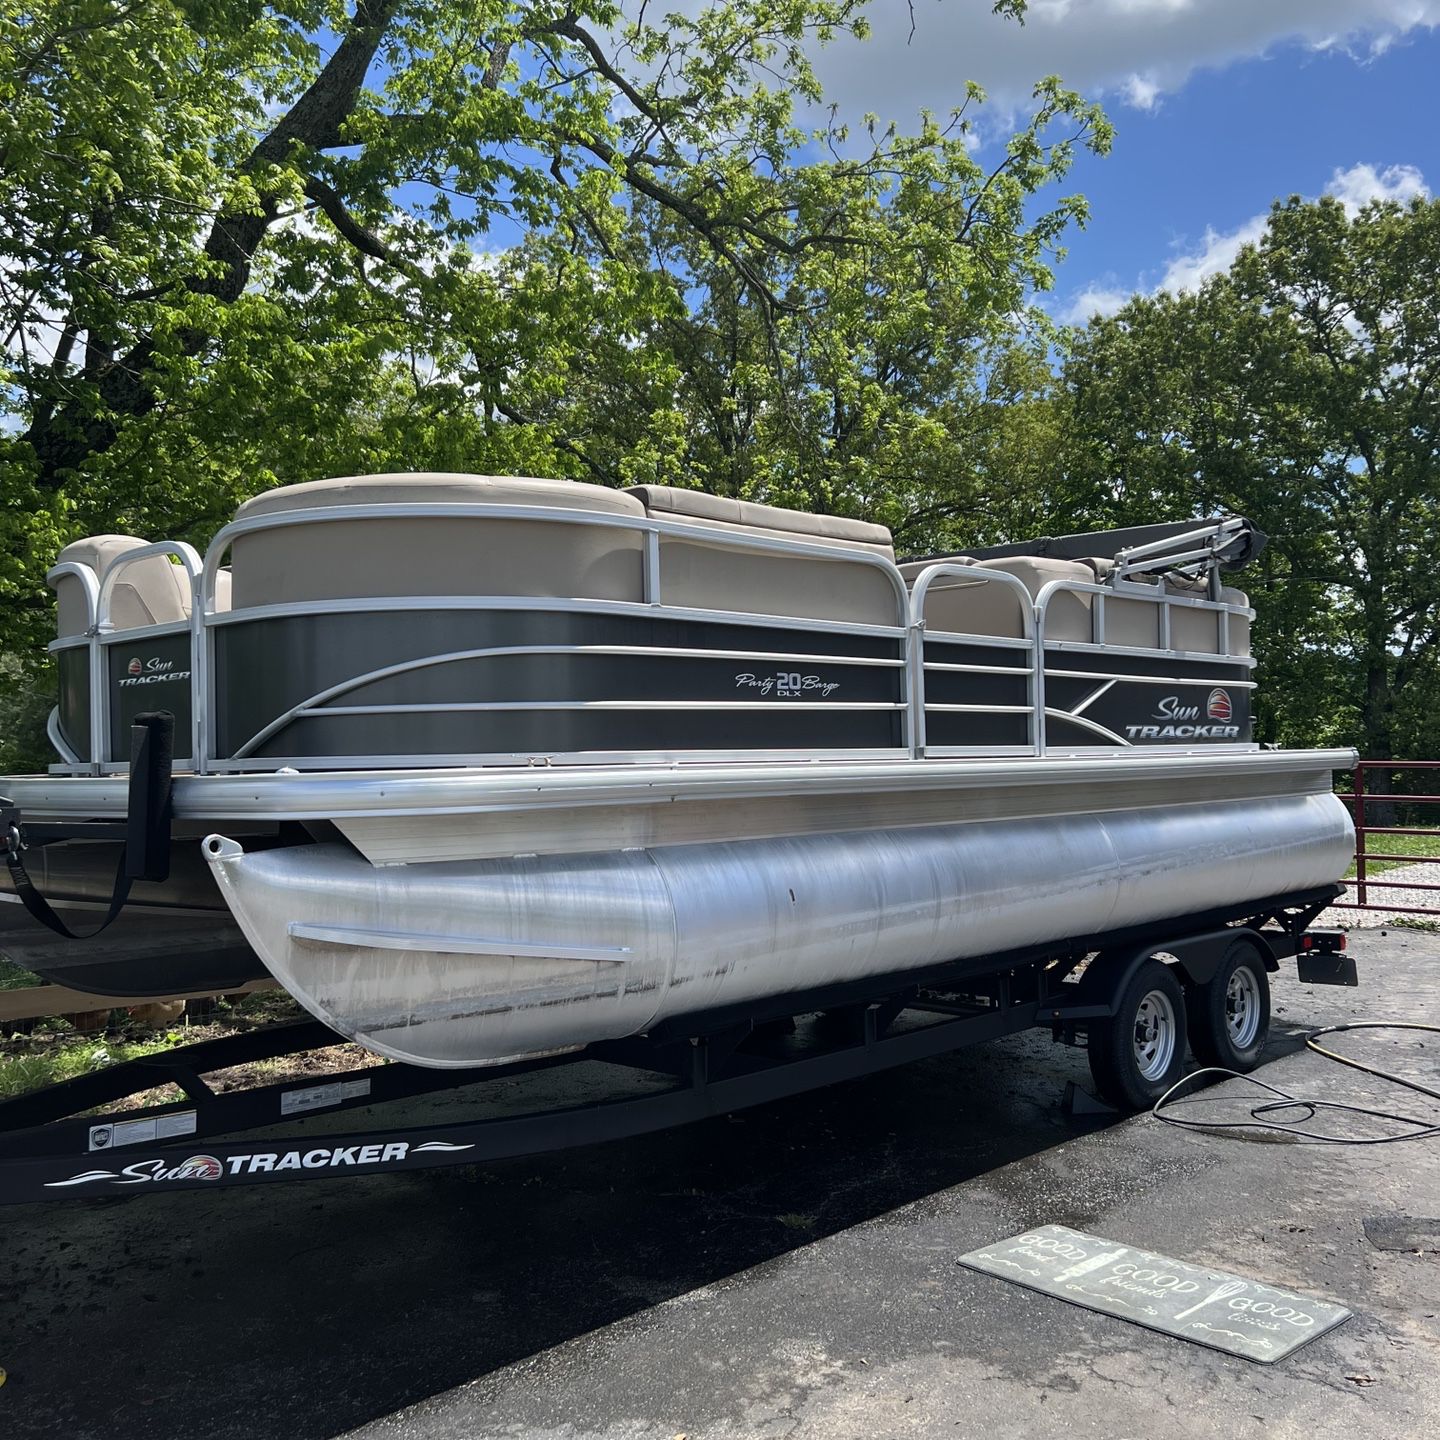 2018 Suntracker Party Barge 20 DLX